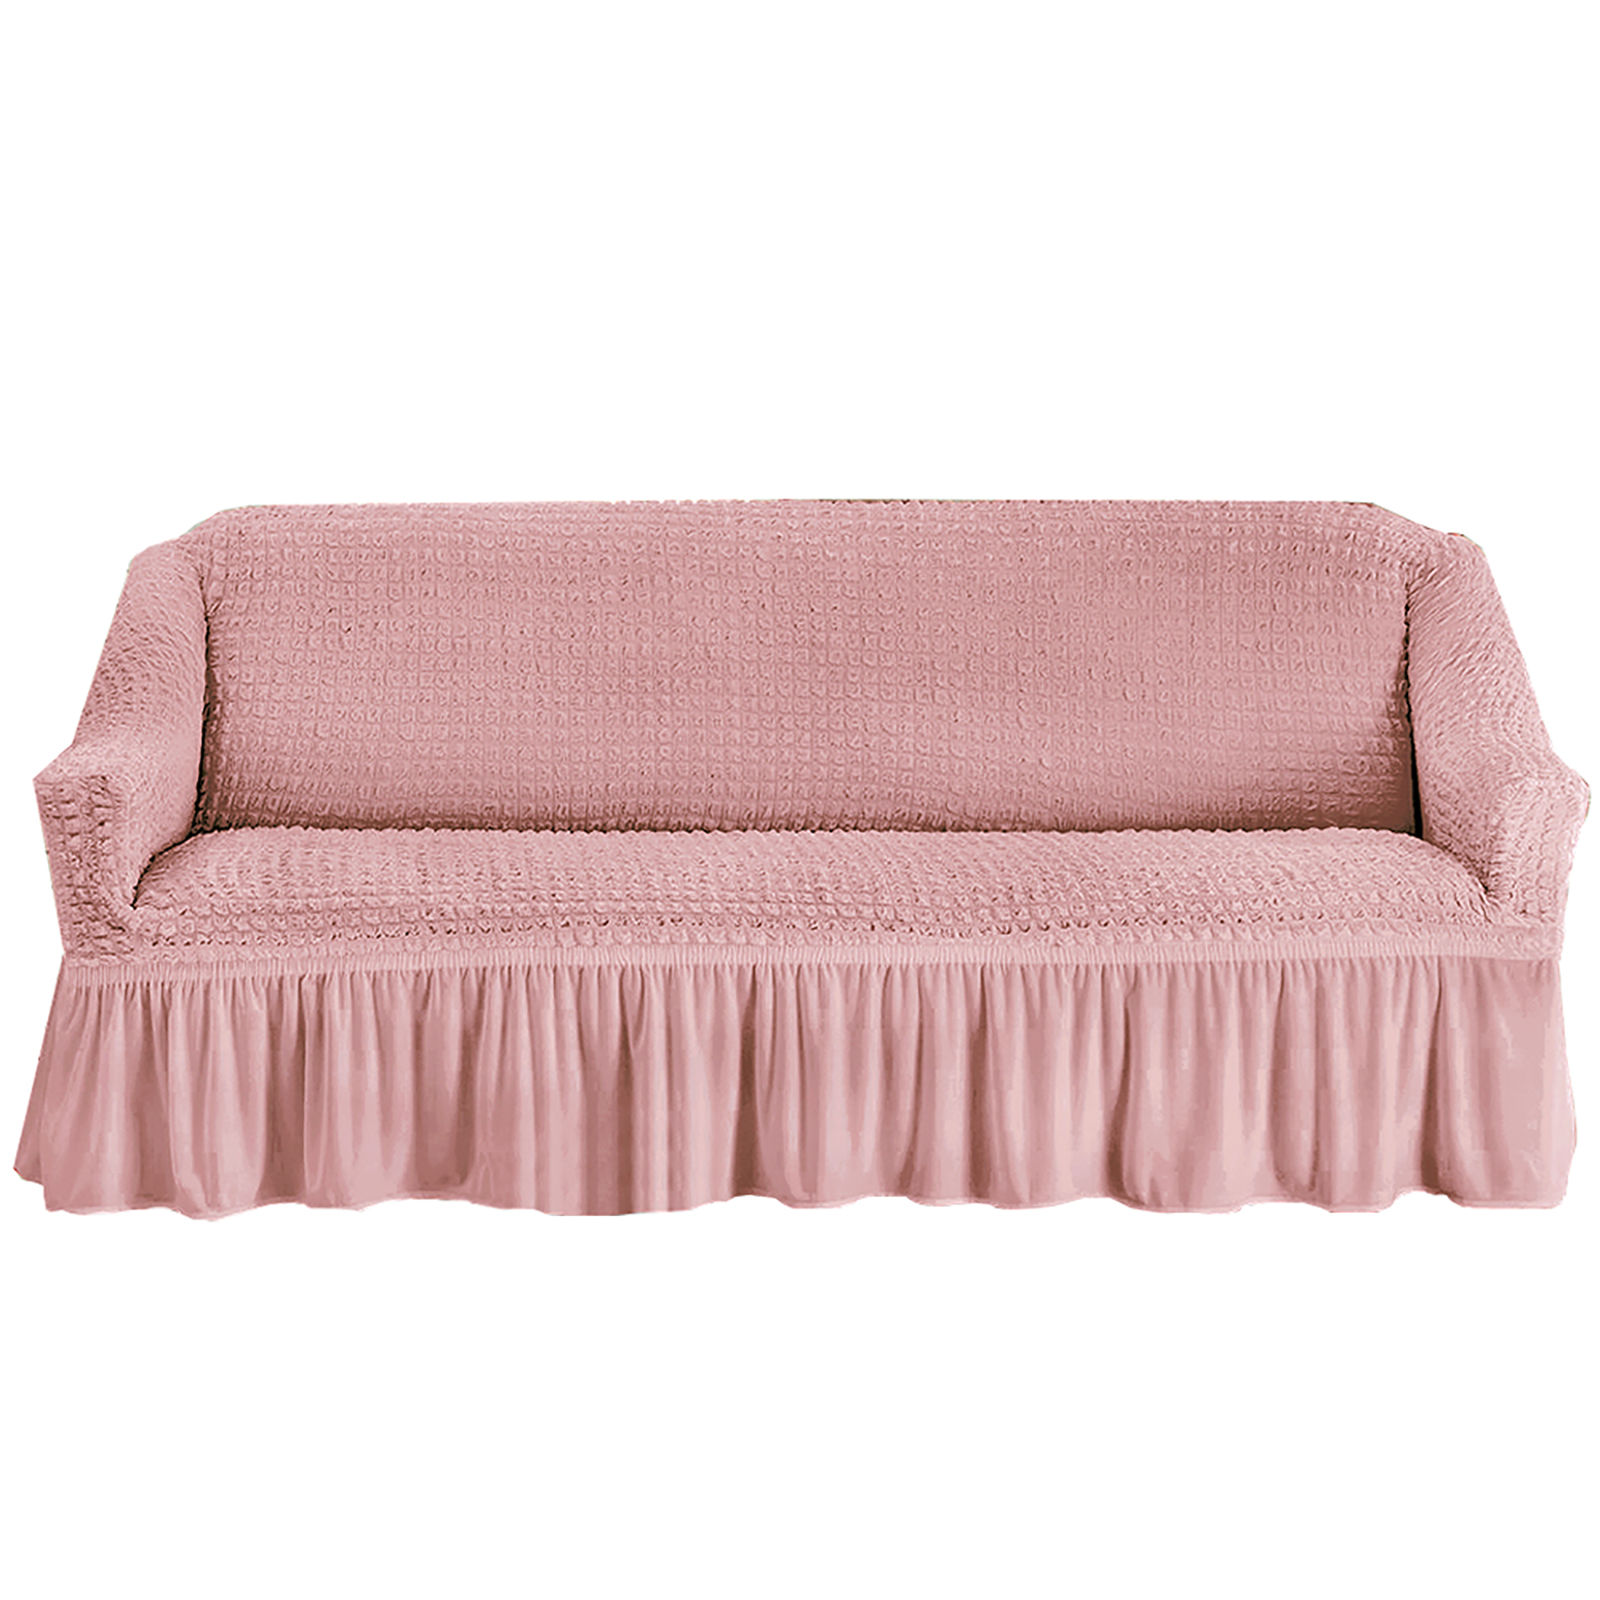 Stretch Sofa Slipcover, 3 Seater Sofa Slipcovers With Skirt With Armless Soft Sofa Cover Elastic Straps Sofa Slipcover For Living Room Kids Pets-Pink-X-Large